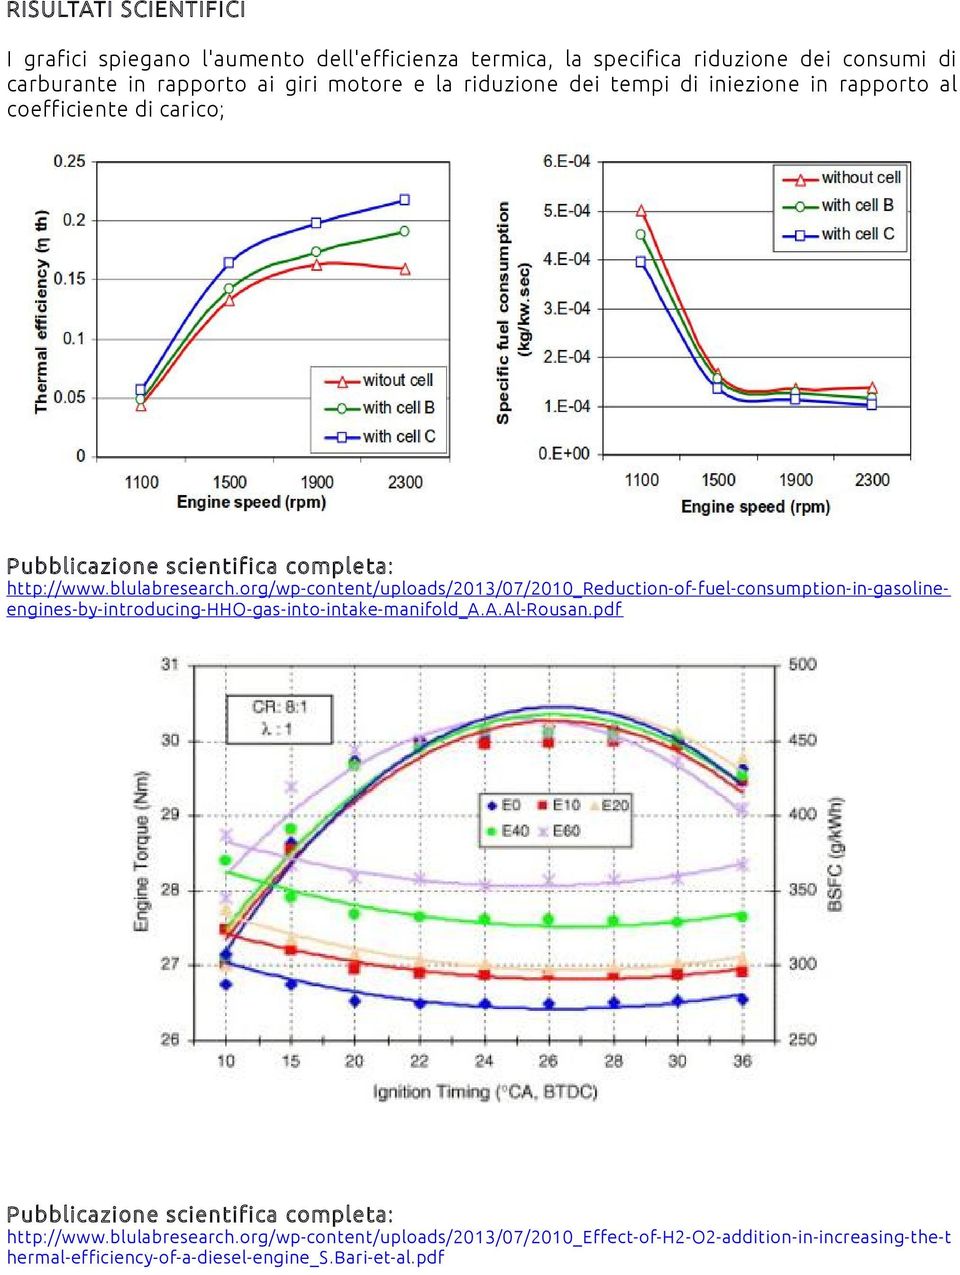 org/wp-content/uploads/2013/07/2010_reduction-of-fuel-consumption-in-gasolineengines-by-introducing-hho-gas-into-intake-manifold_a.a.al-rousan.